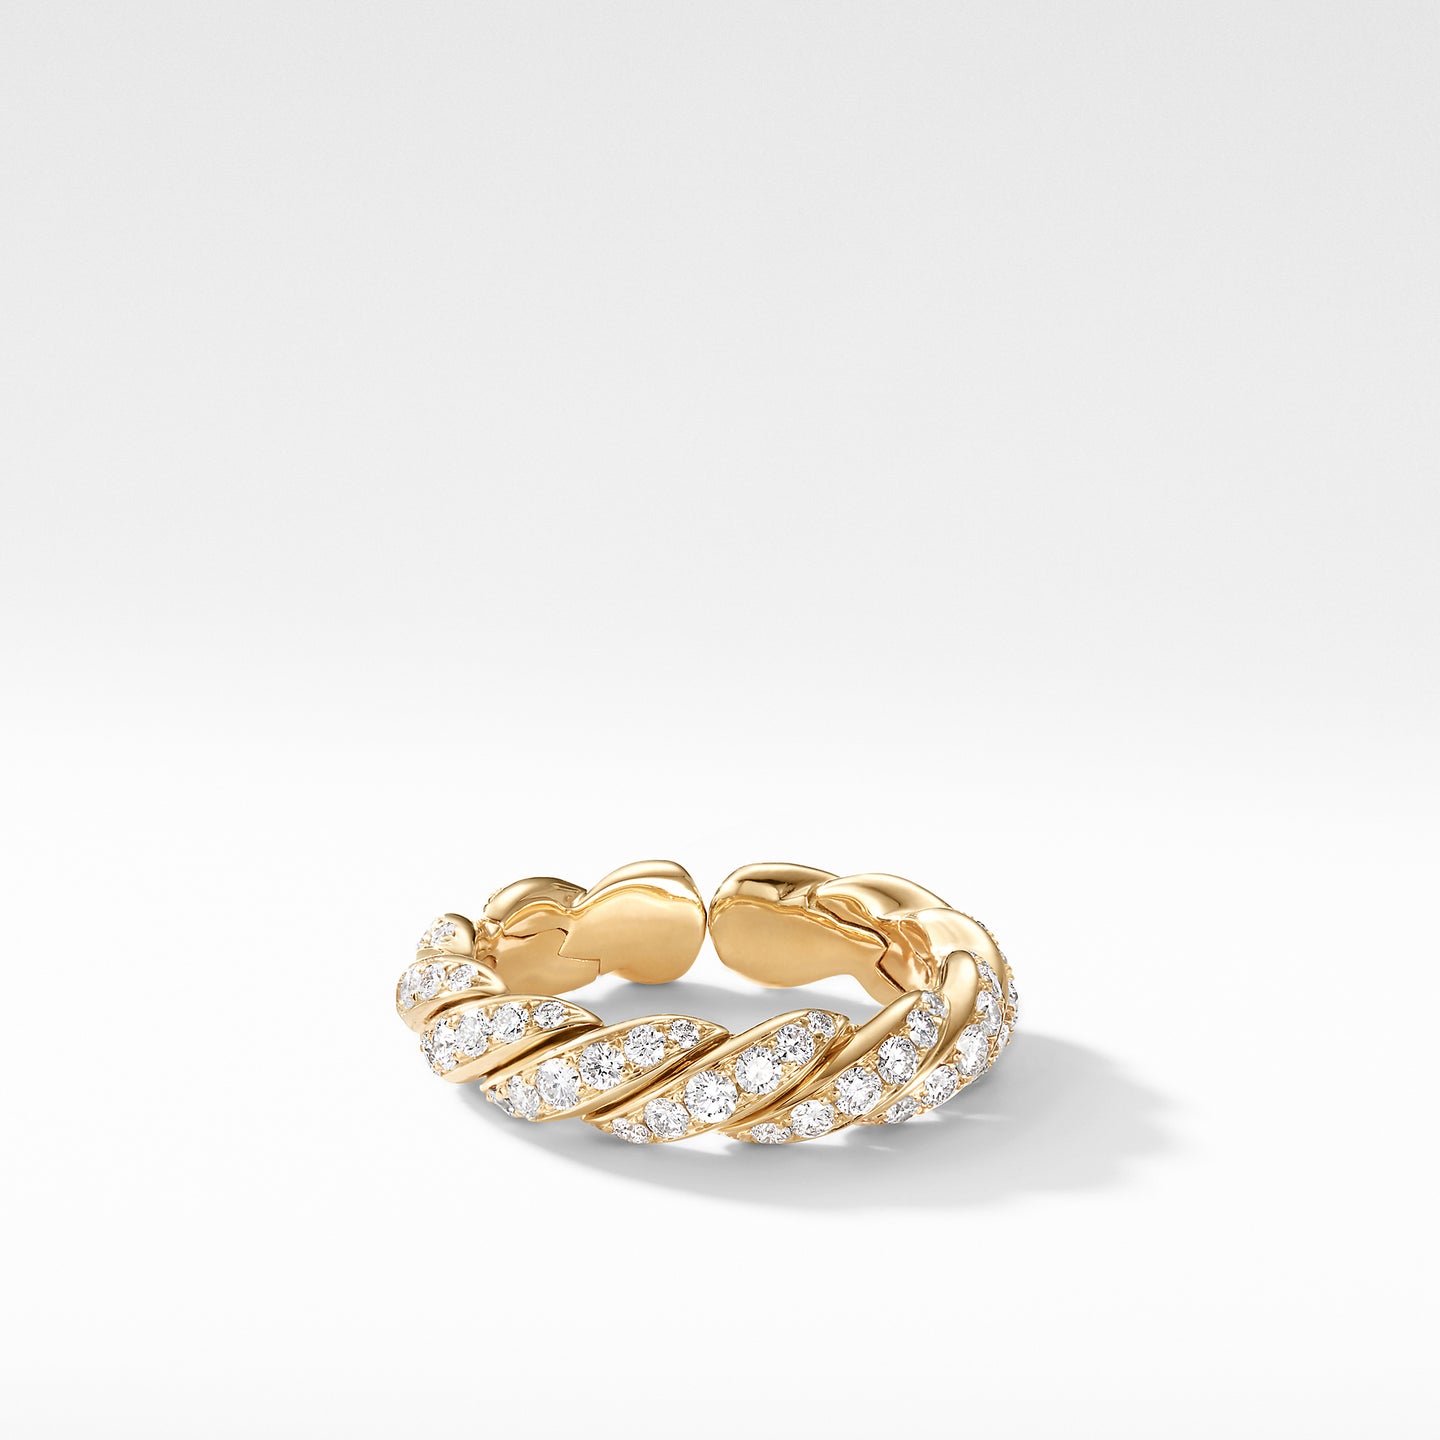 Pavéflex Band Ring in 18K Gold with Diamonds, Size 6-7